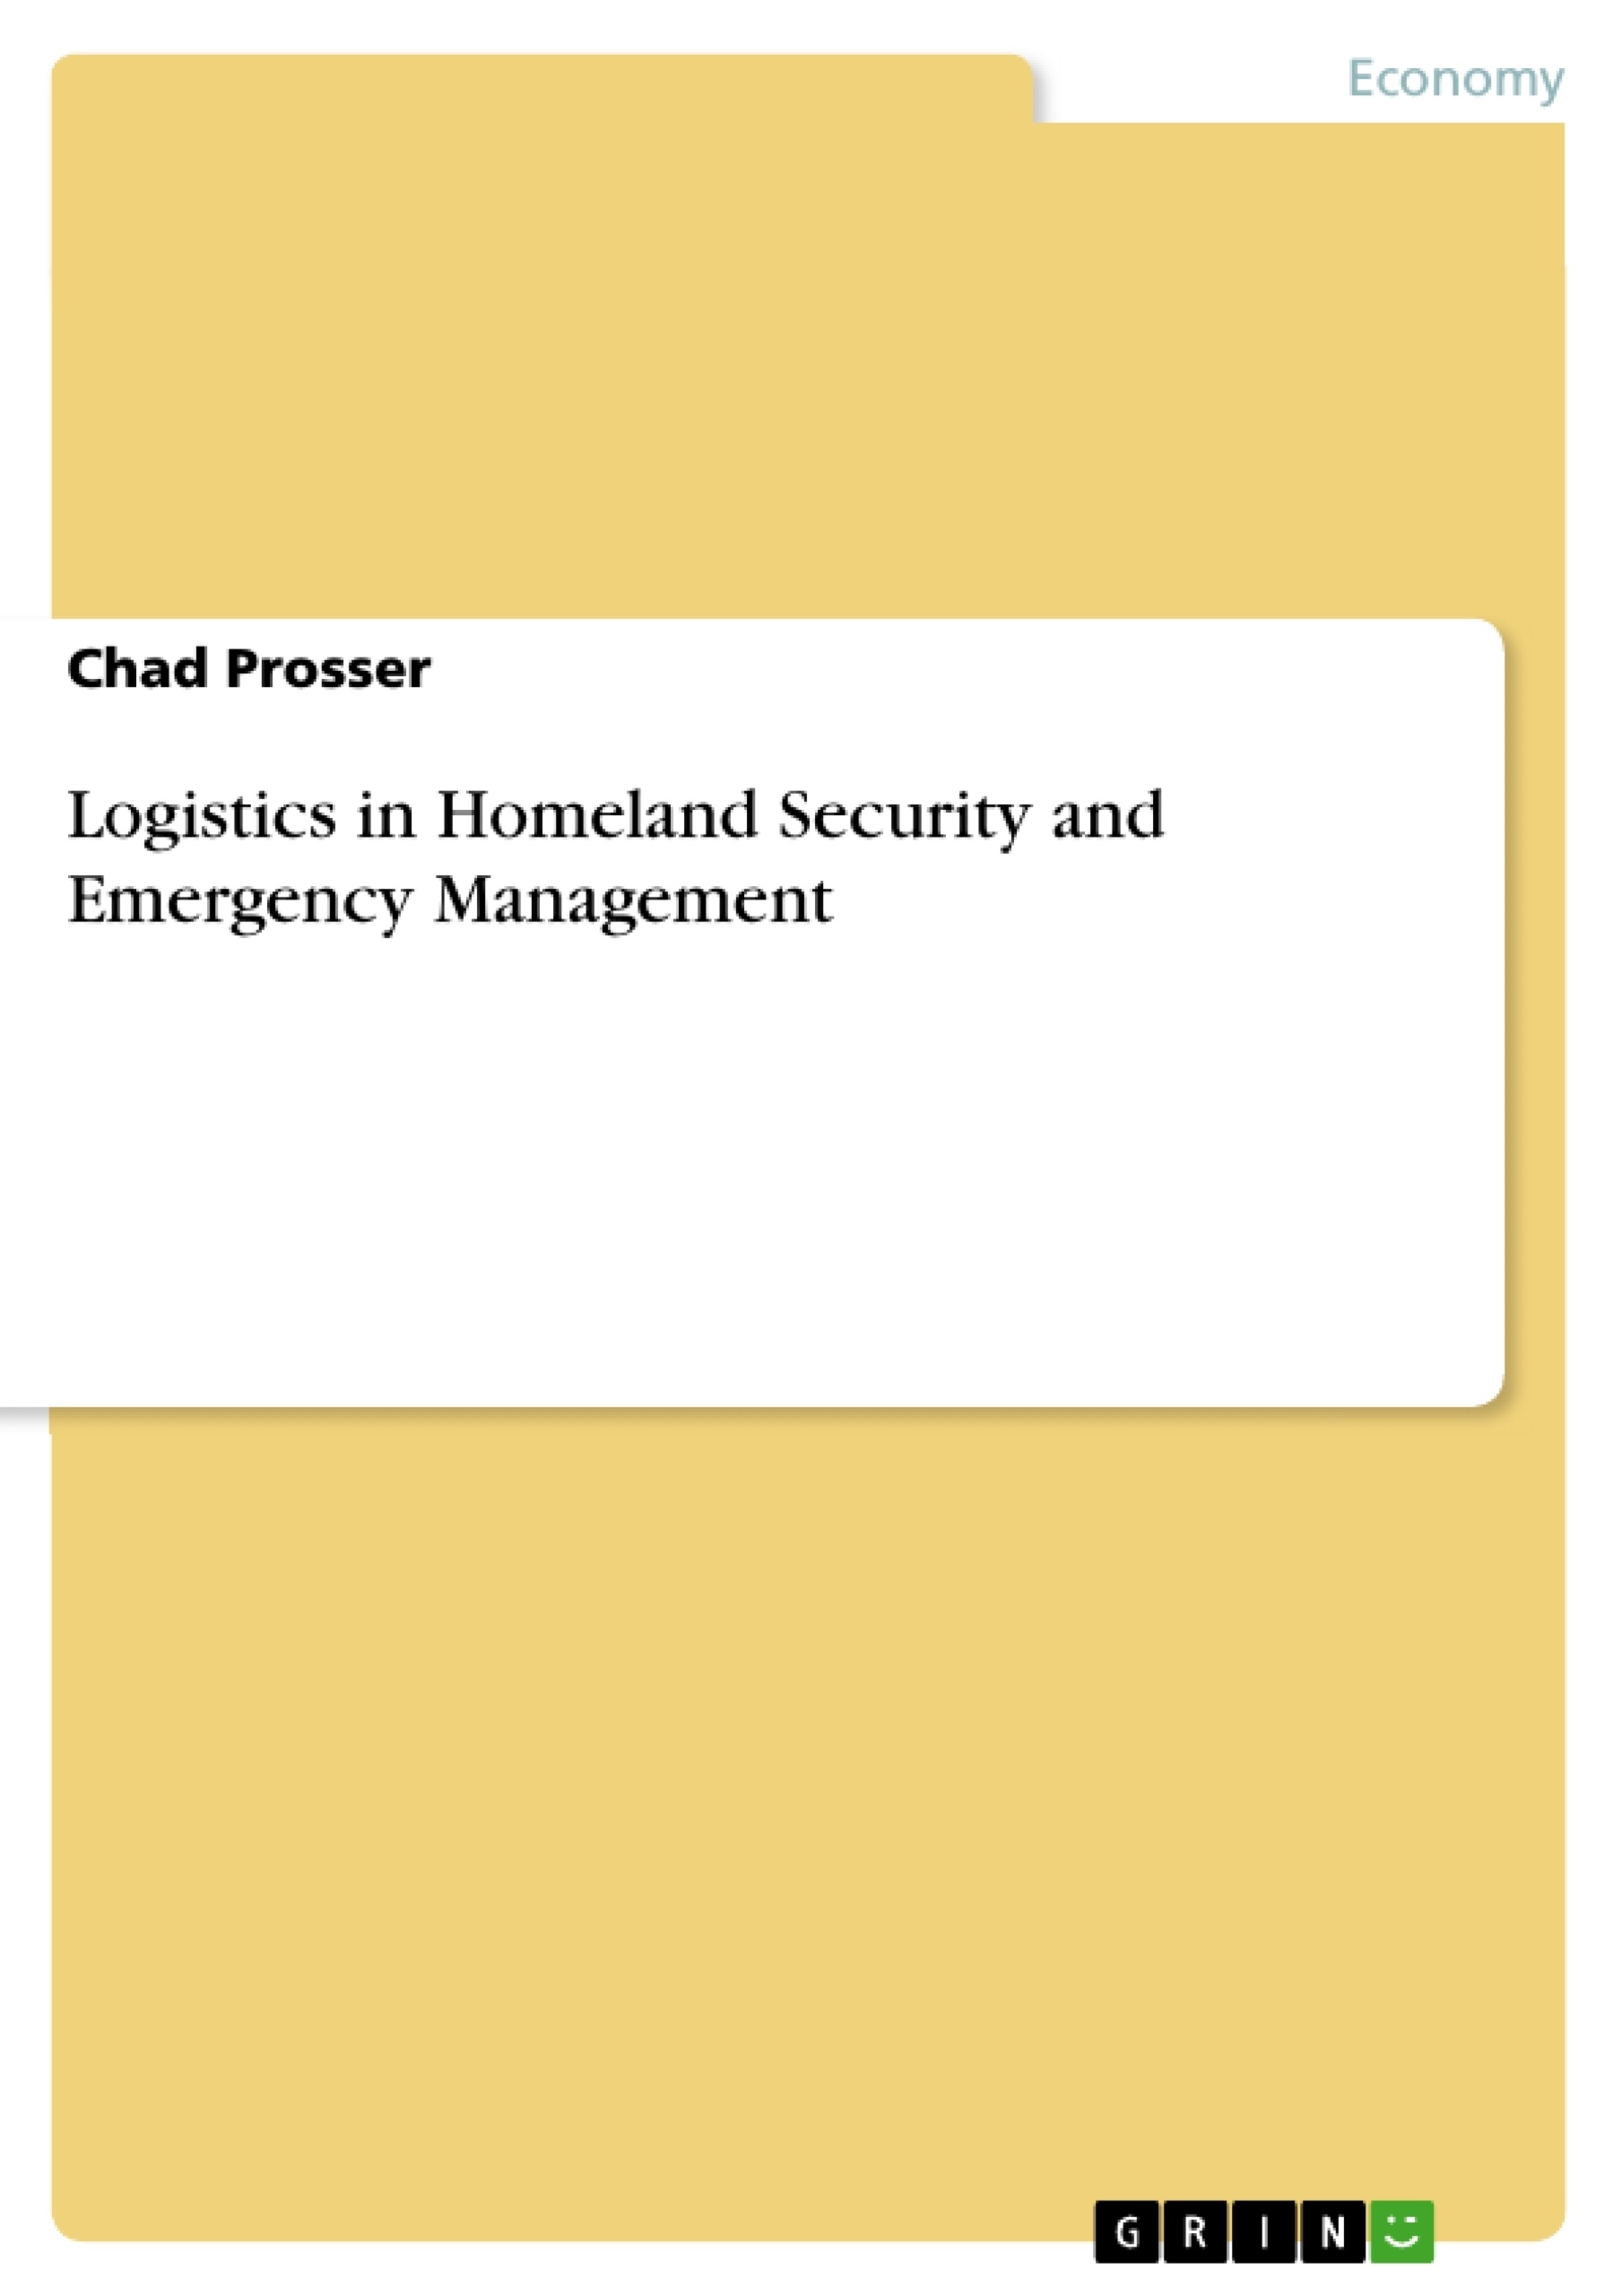 Titel: Logistics in Homeland Security and Emergency Management